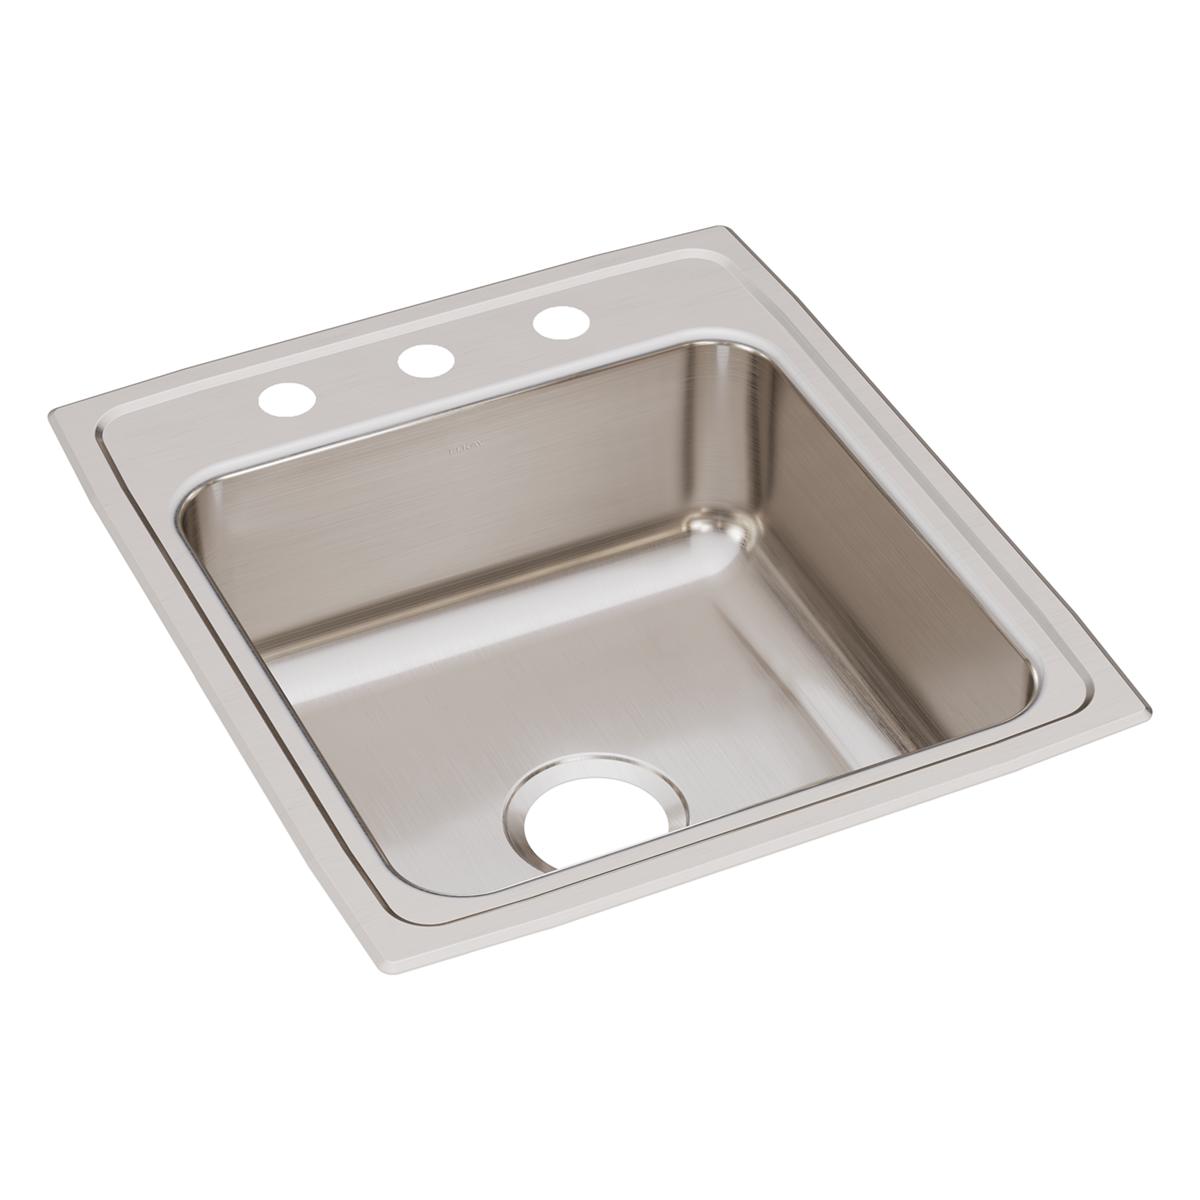 Elkay Lustertone Classic 19-1/2" x 22" x 7-5/8" Single Bowl Drop-in Sink with Quick-clip